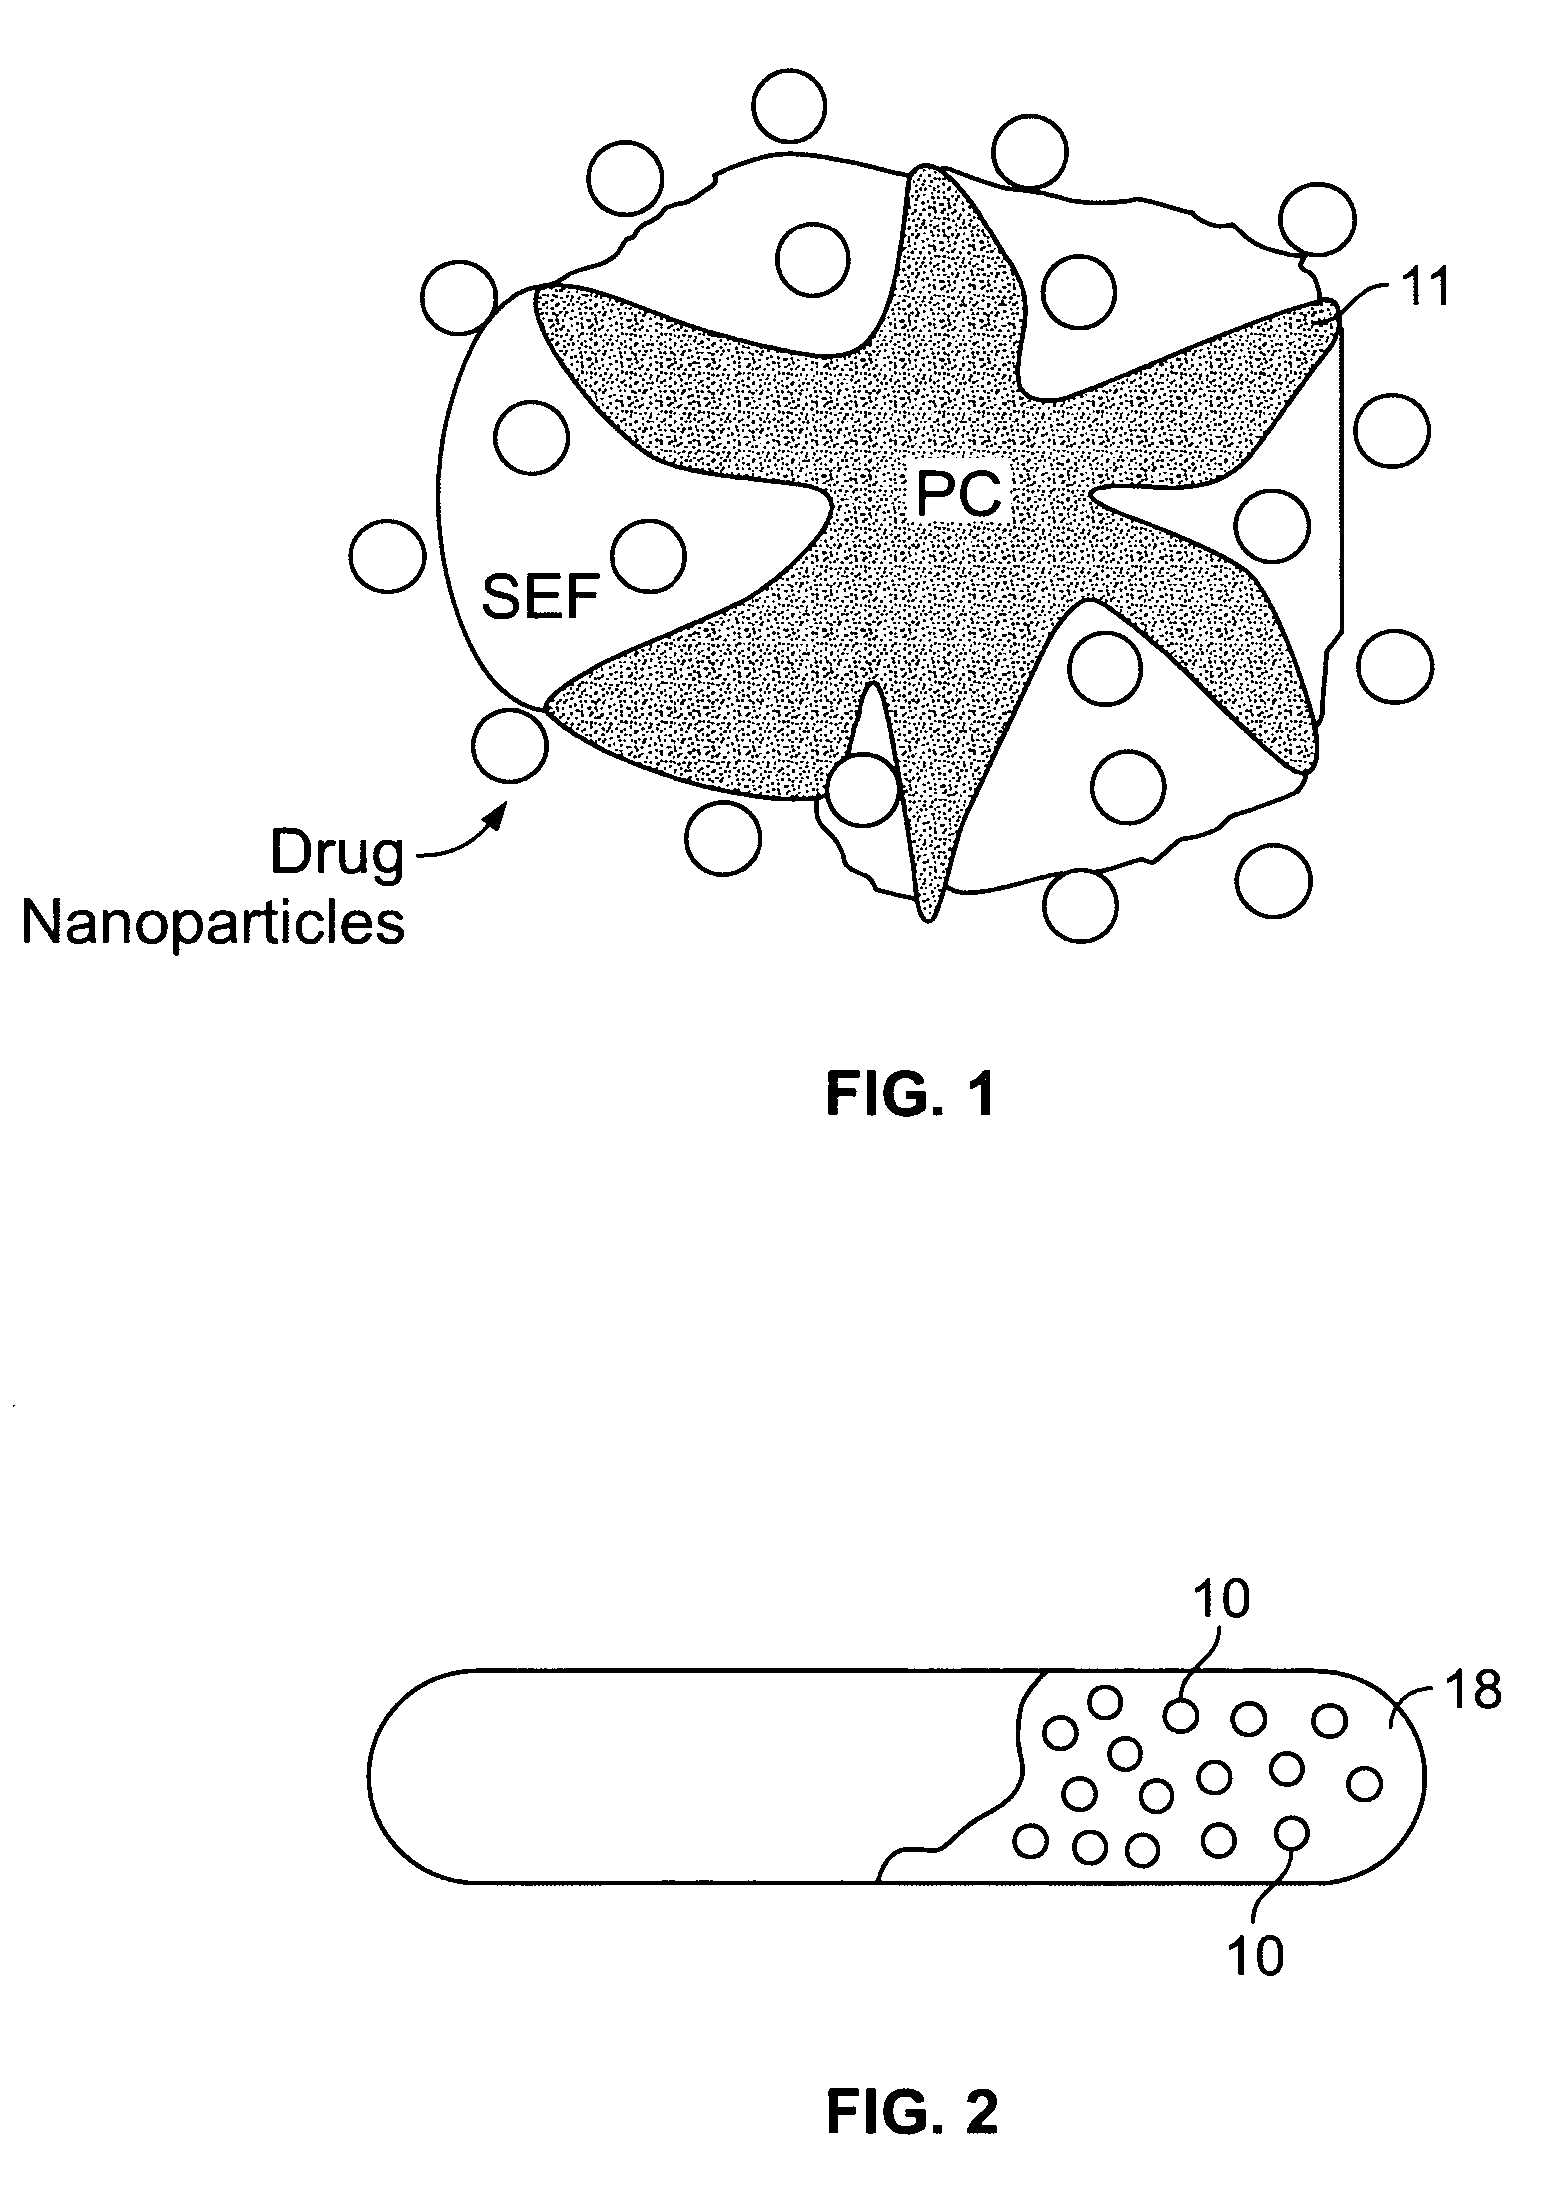 Controlled release nanoparticle active agent formulation dosage forms and methods